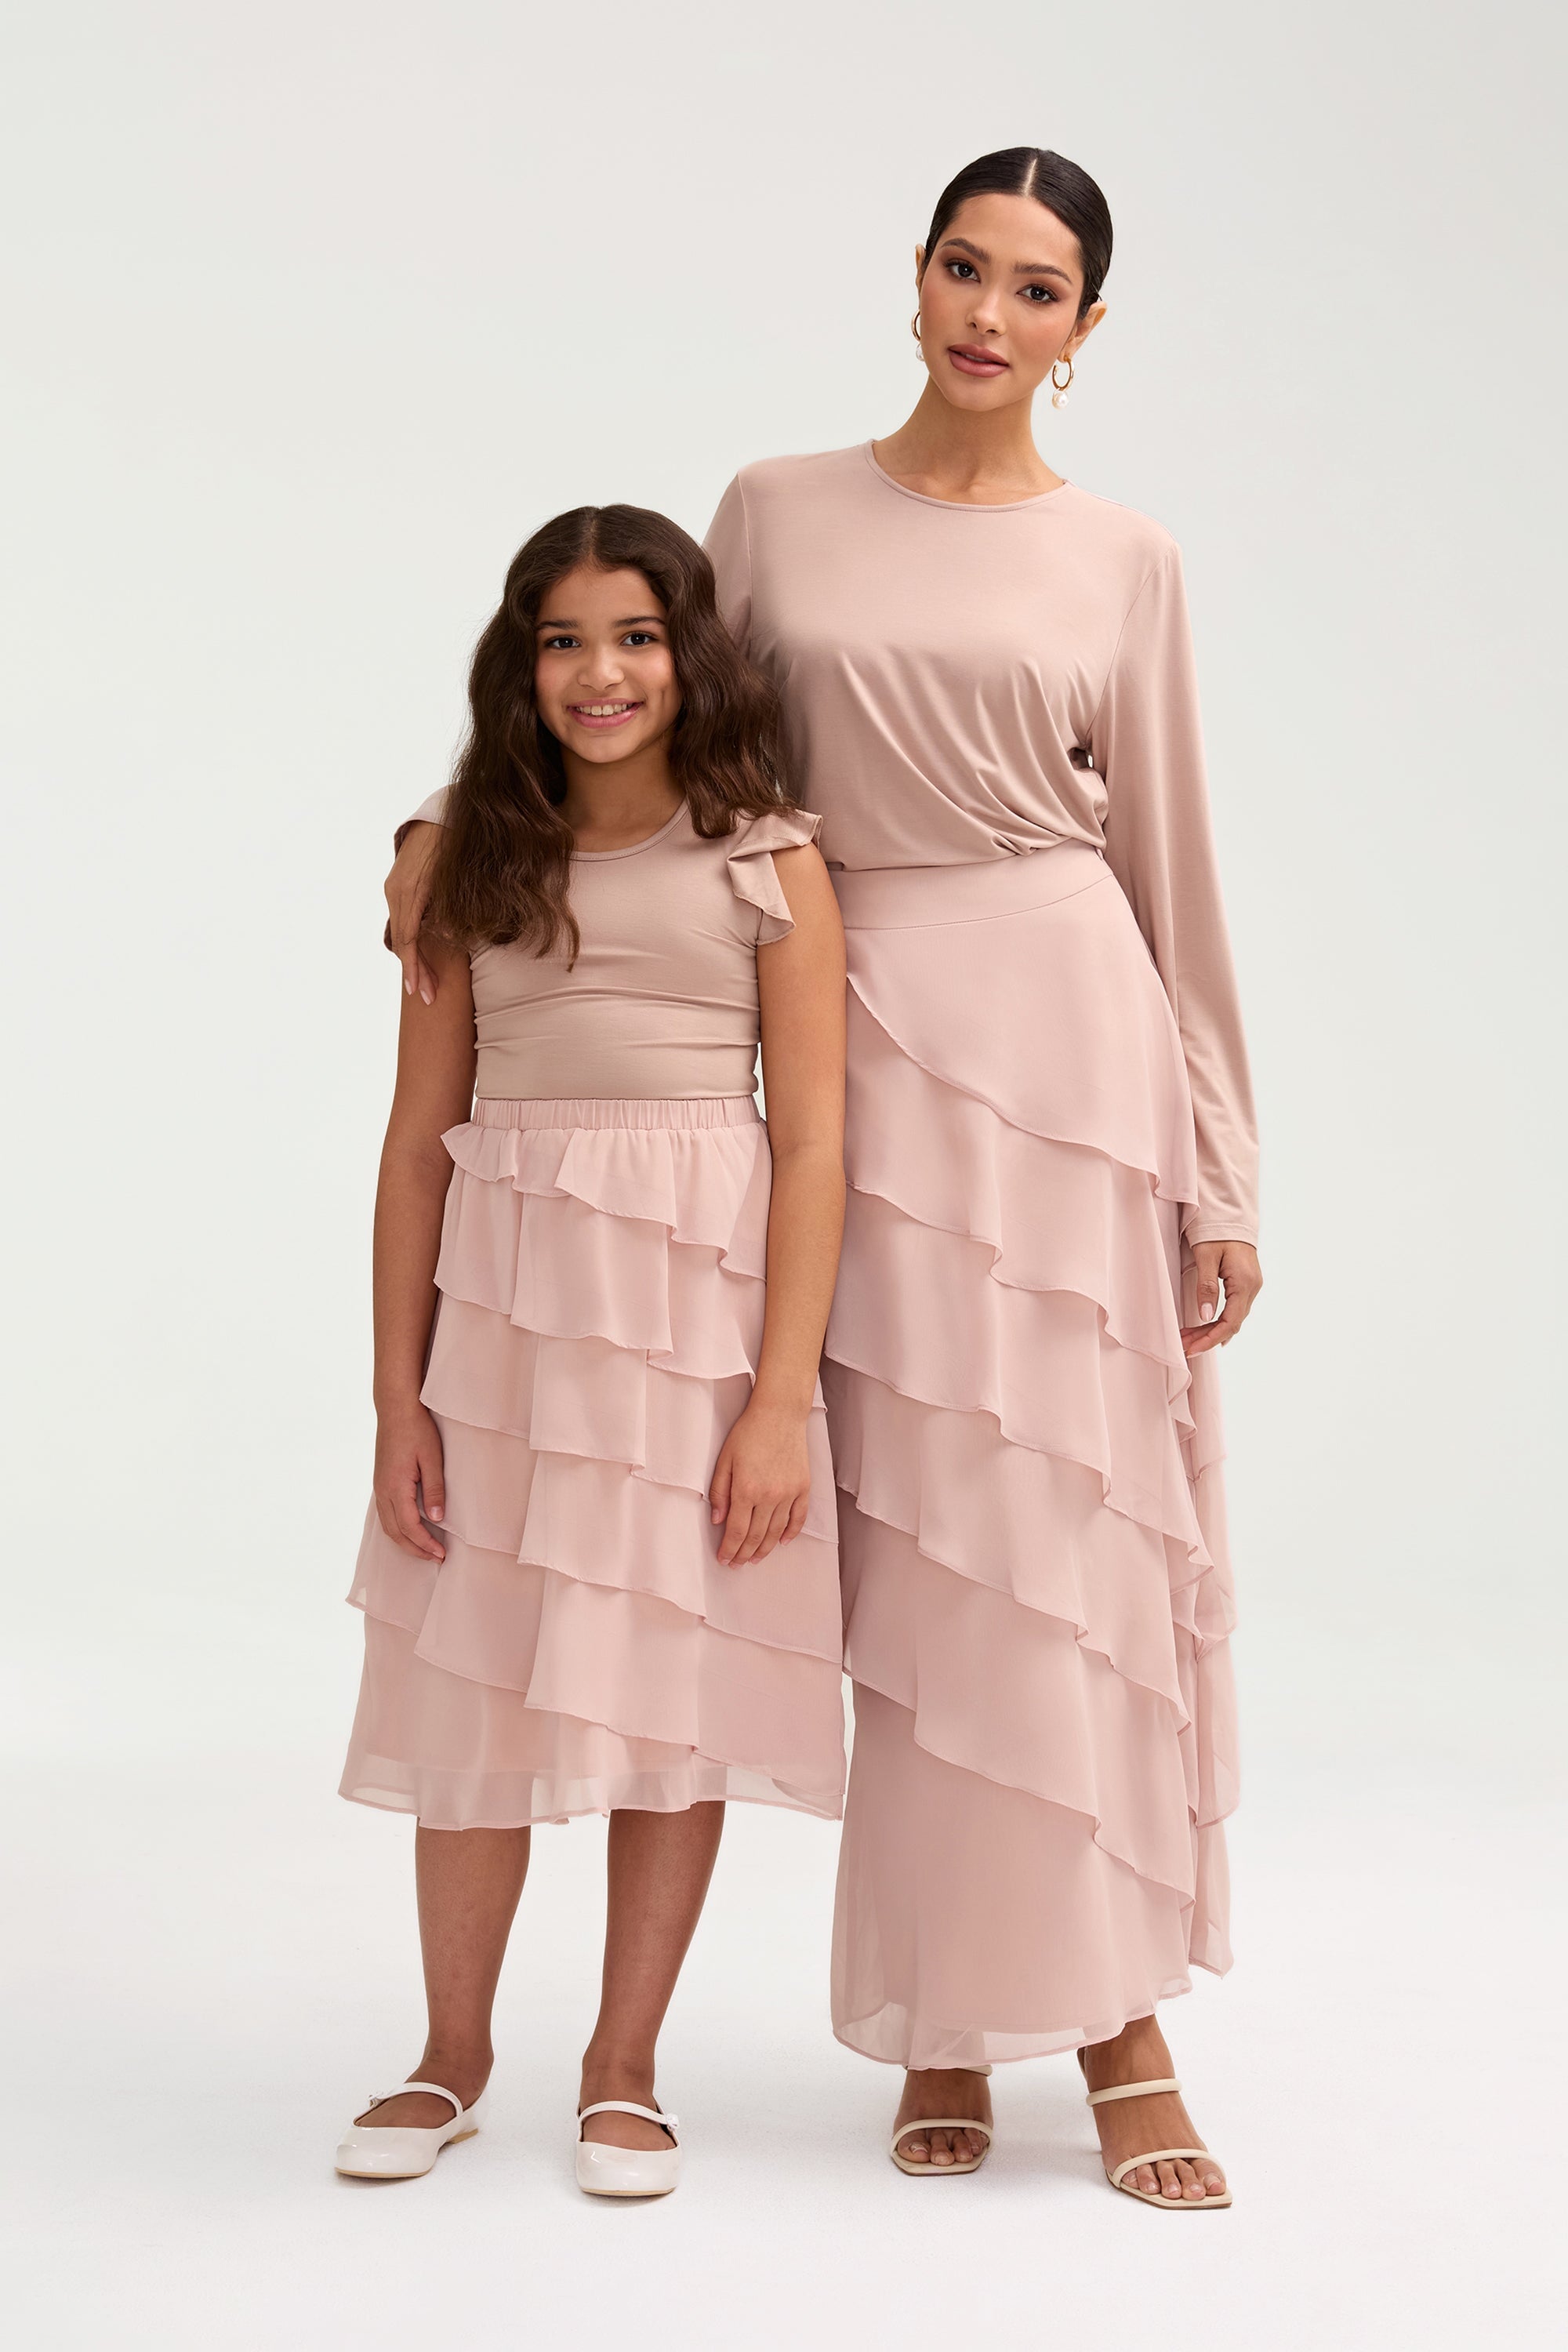 Women's Collection - Tops, Dresses, Skirts & More